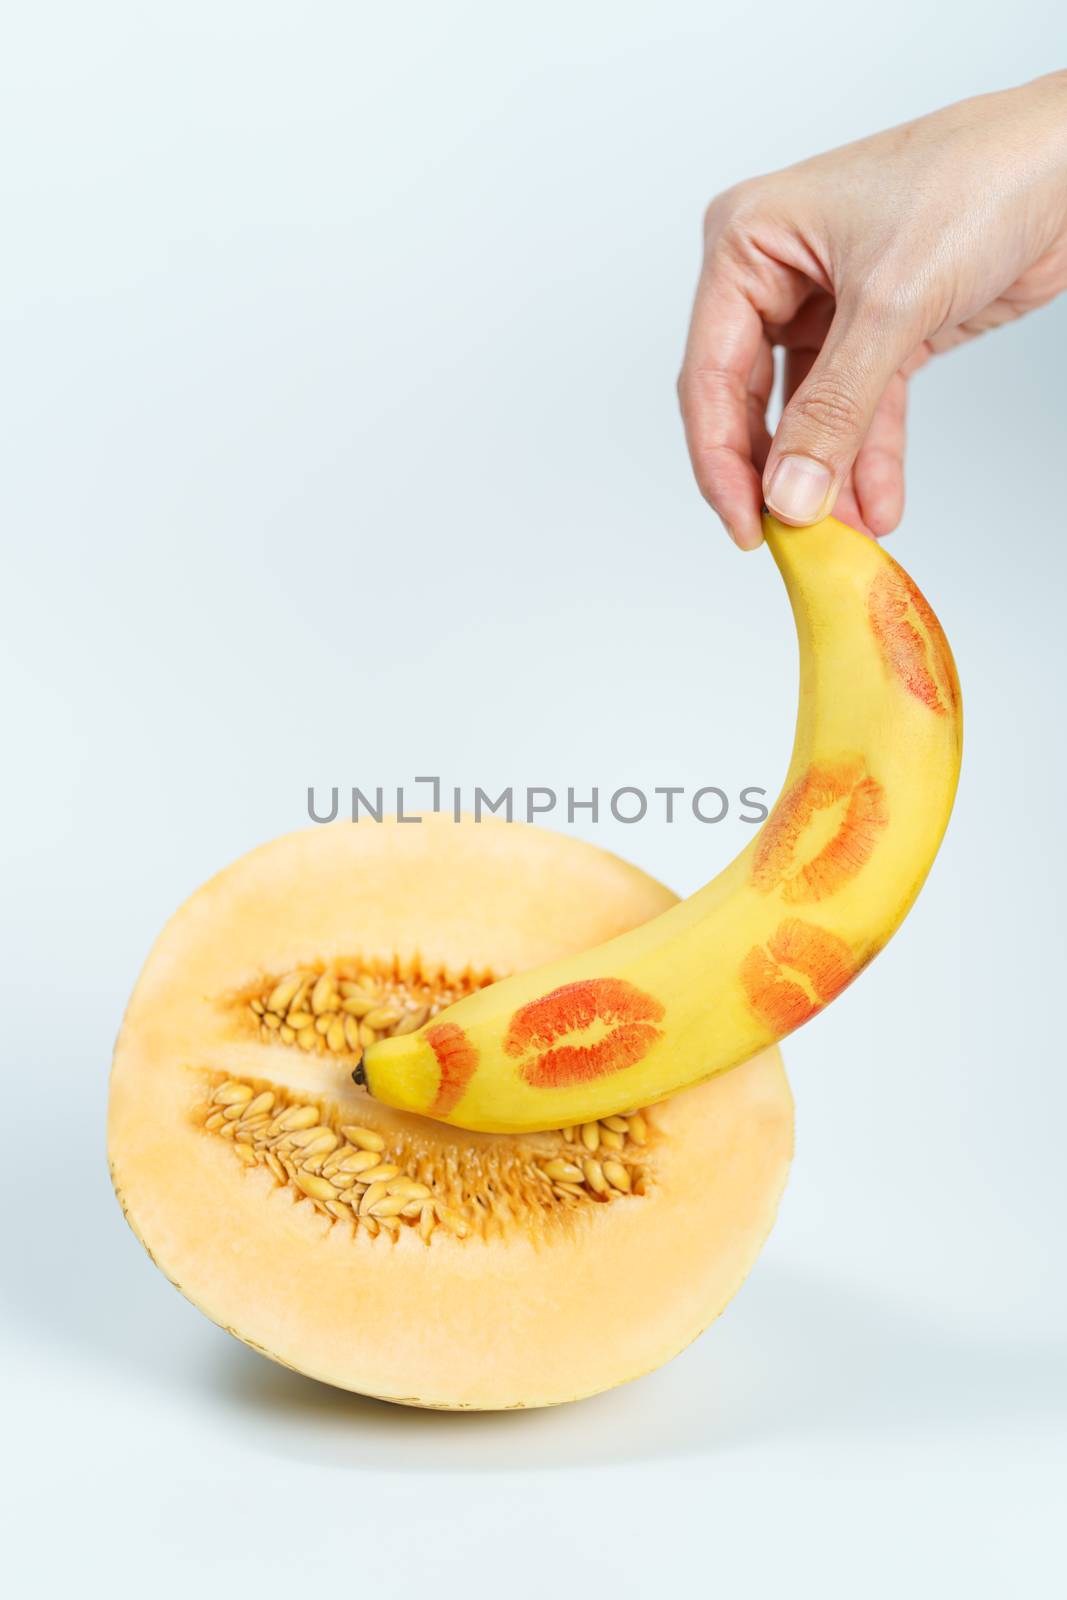 Melon and banana with red lipstick marks on white background, Sex concept.